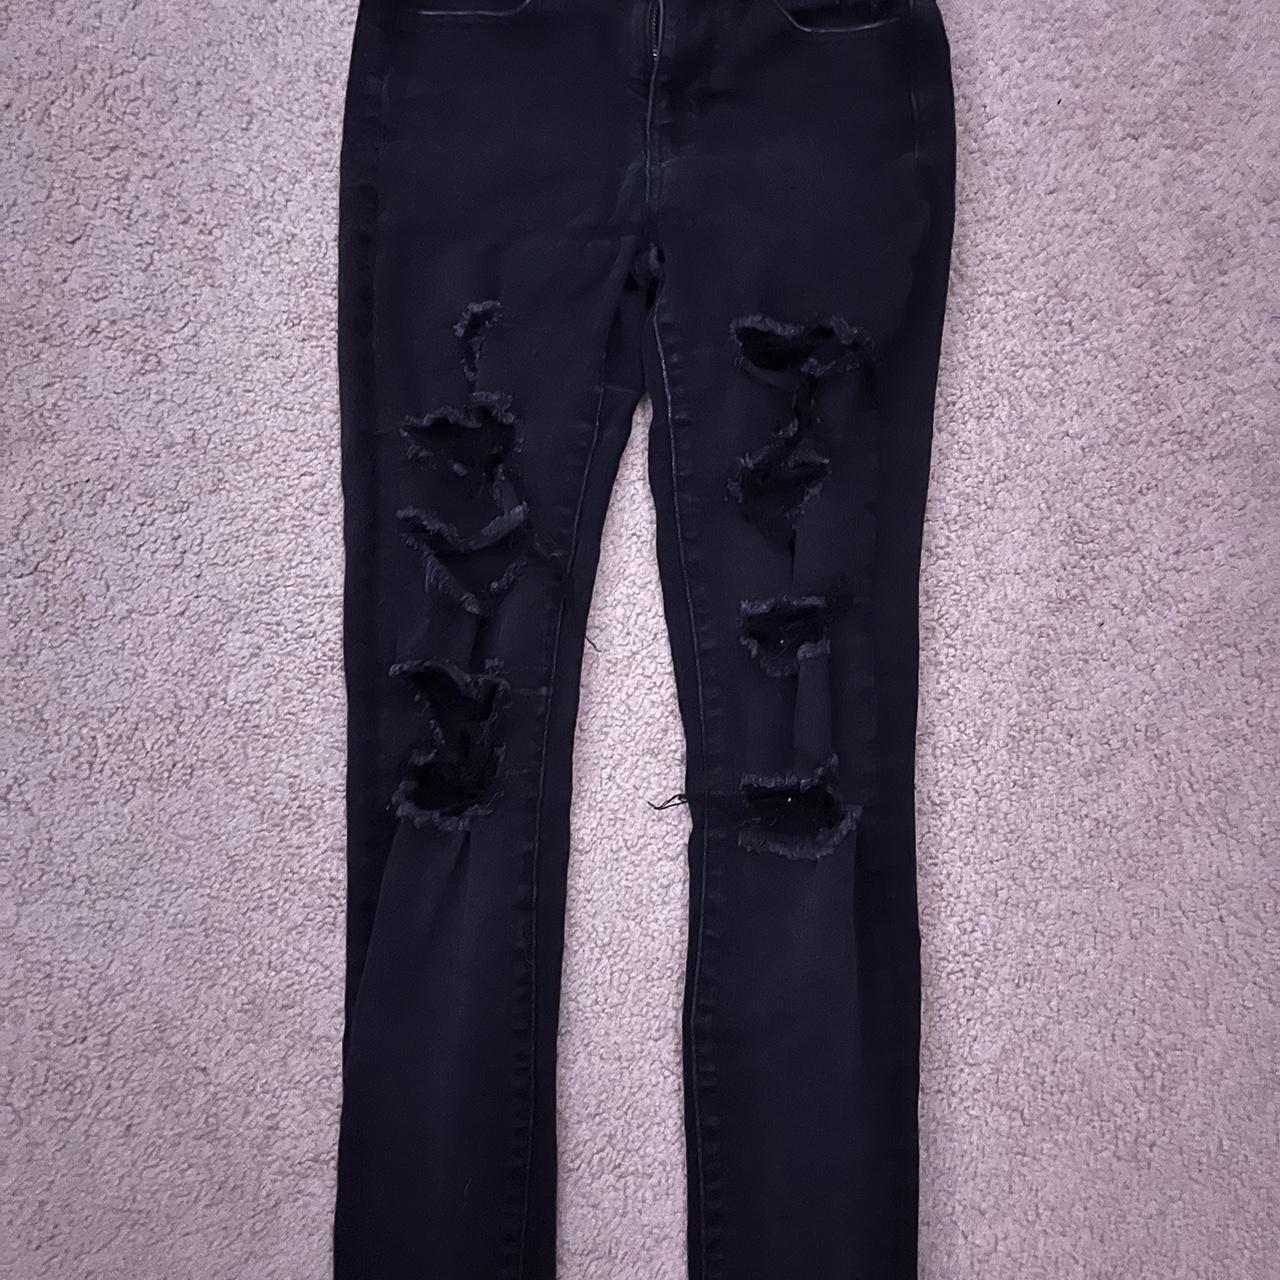 American Eagle Outfitters Skinny Women Black Jeans - Buy American